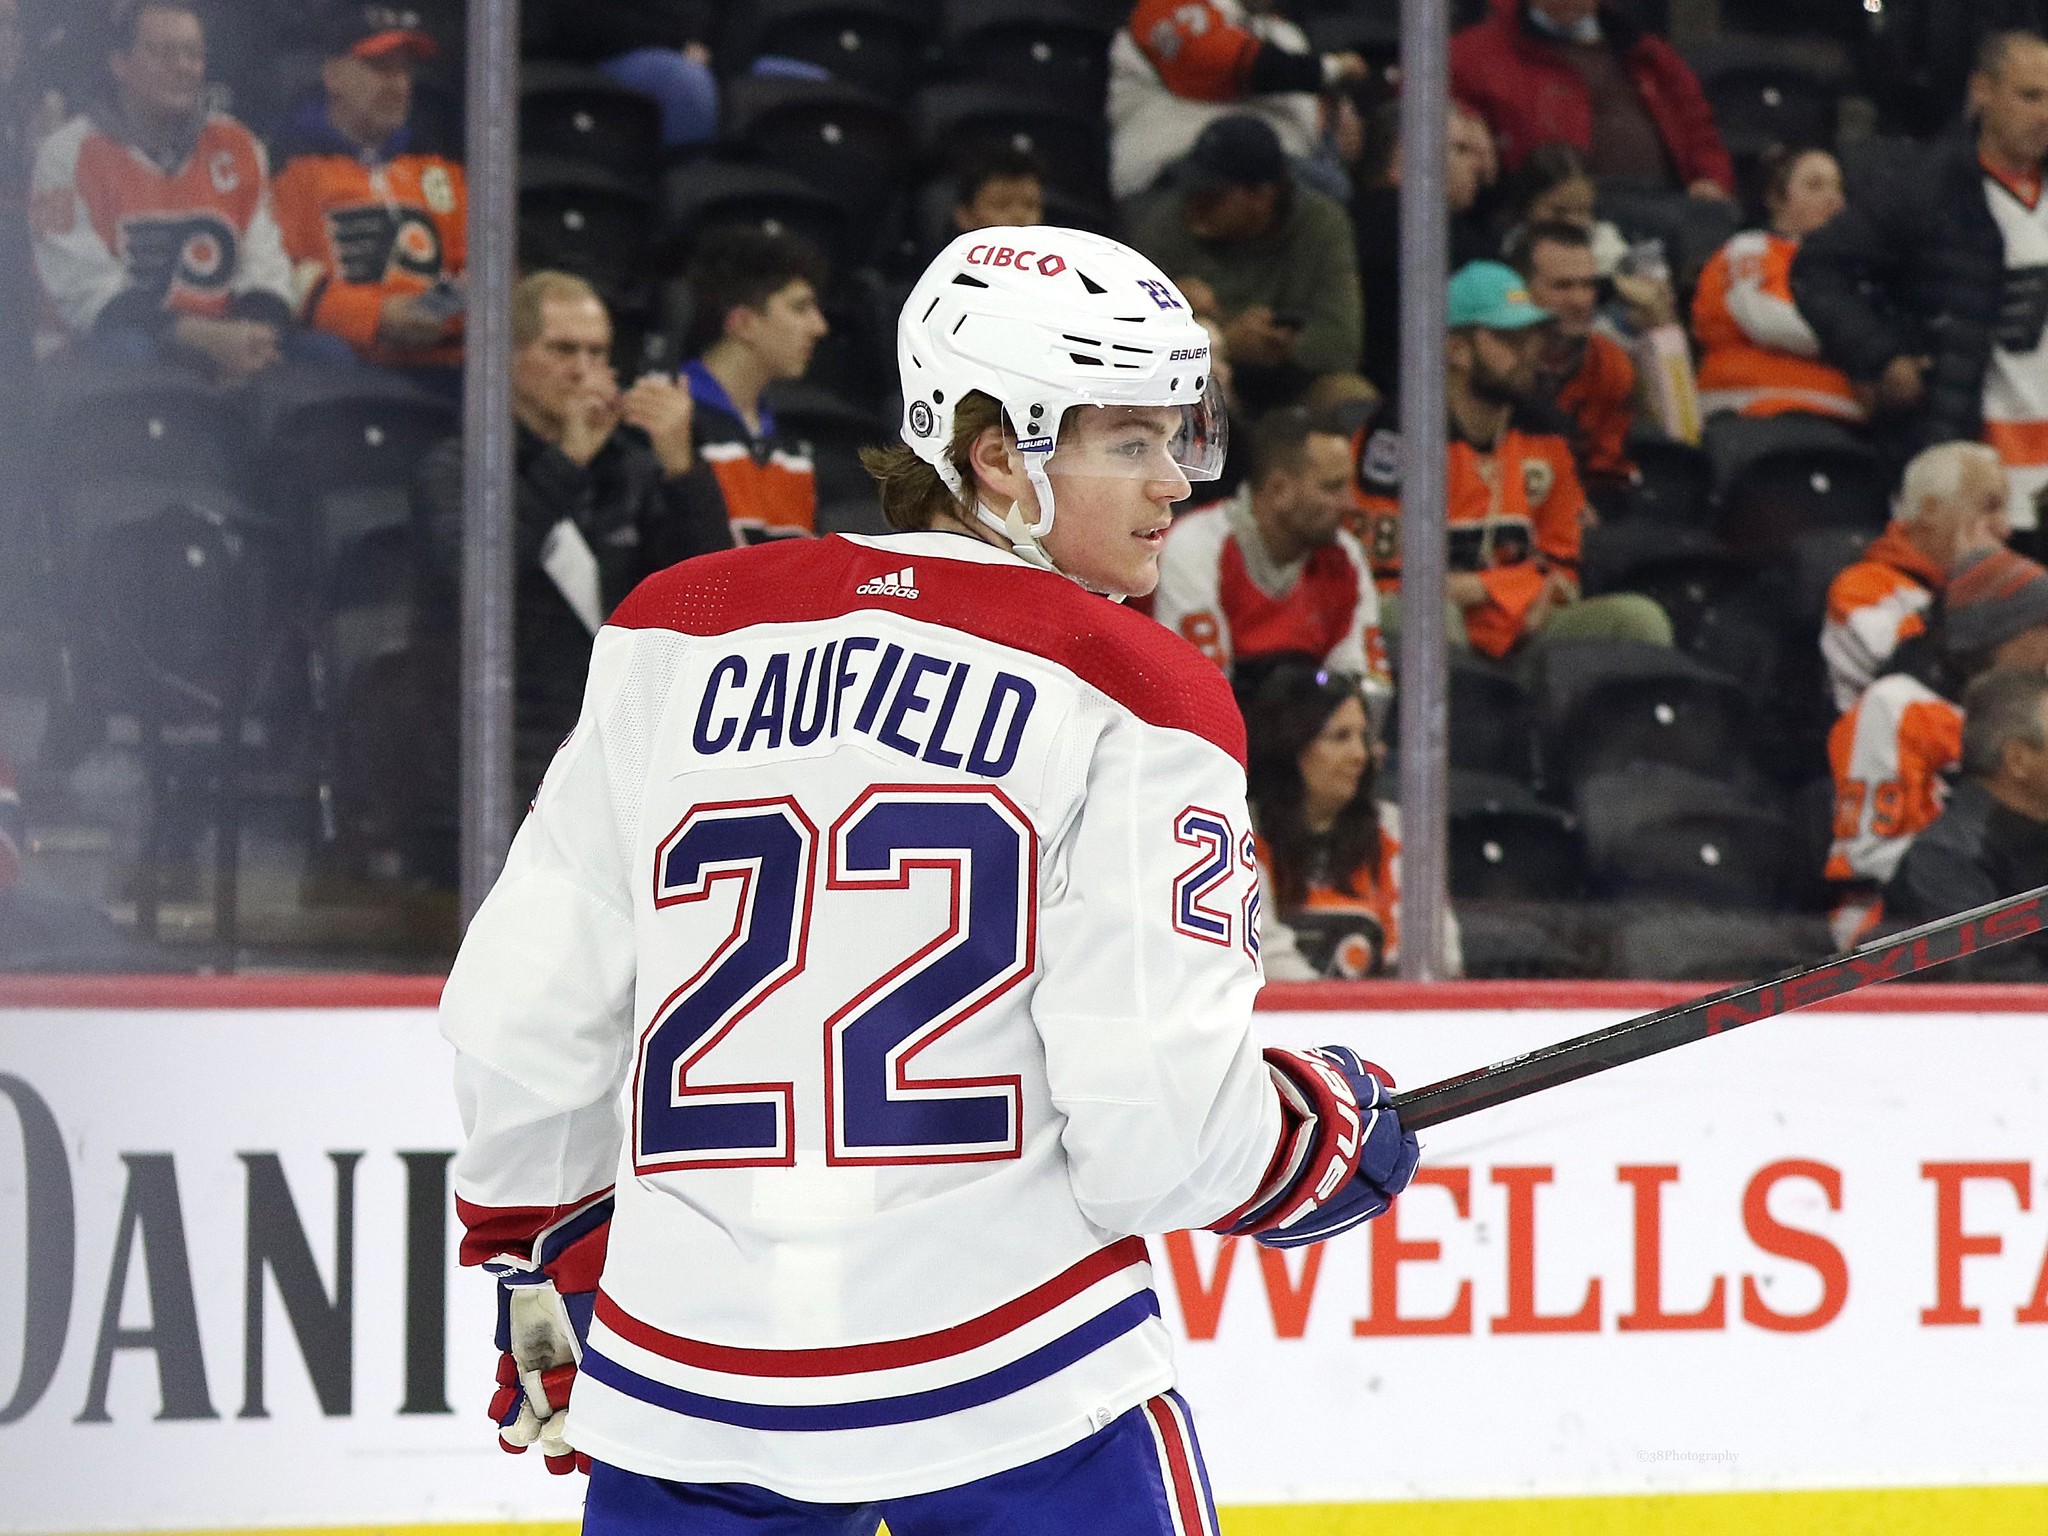 Top Canadiens Benefits of Caufield Extension